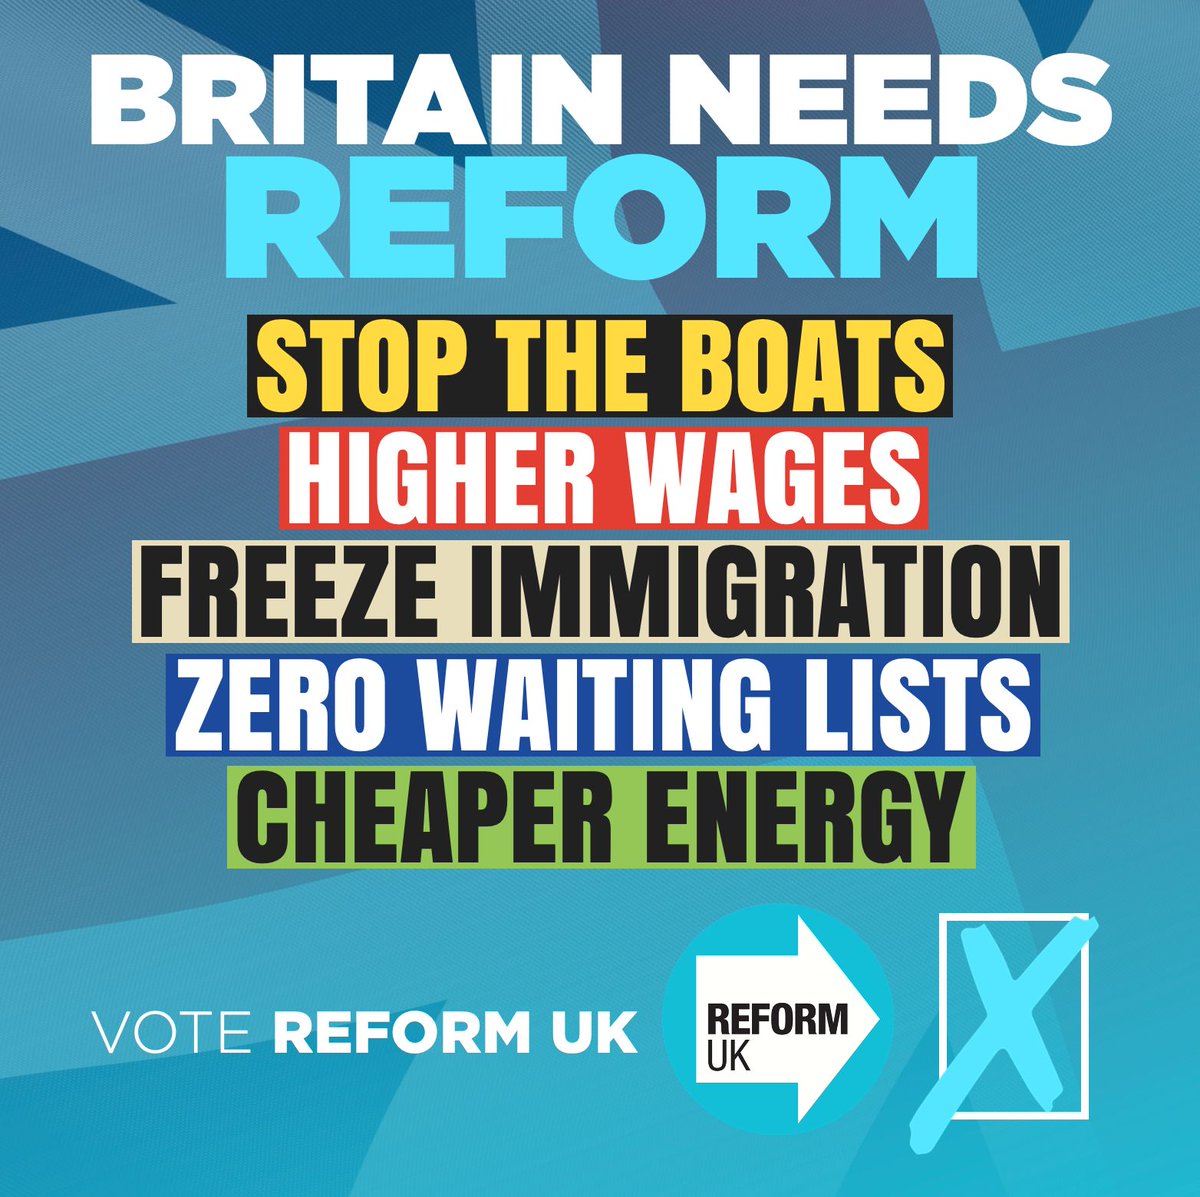 Only Reform UK is ready to save Britain!! Britain needs Reform 🇬🇧